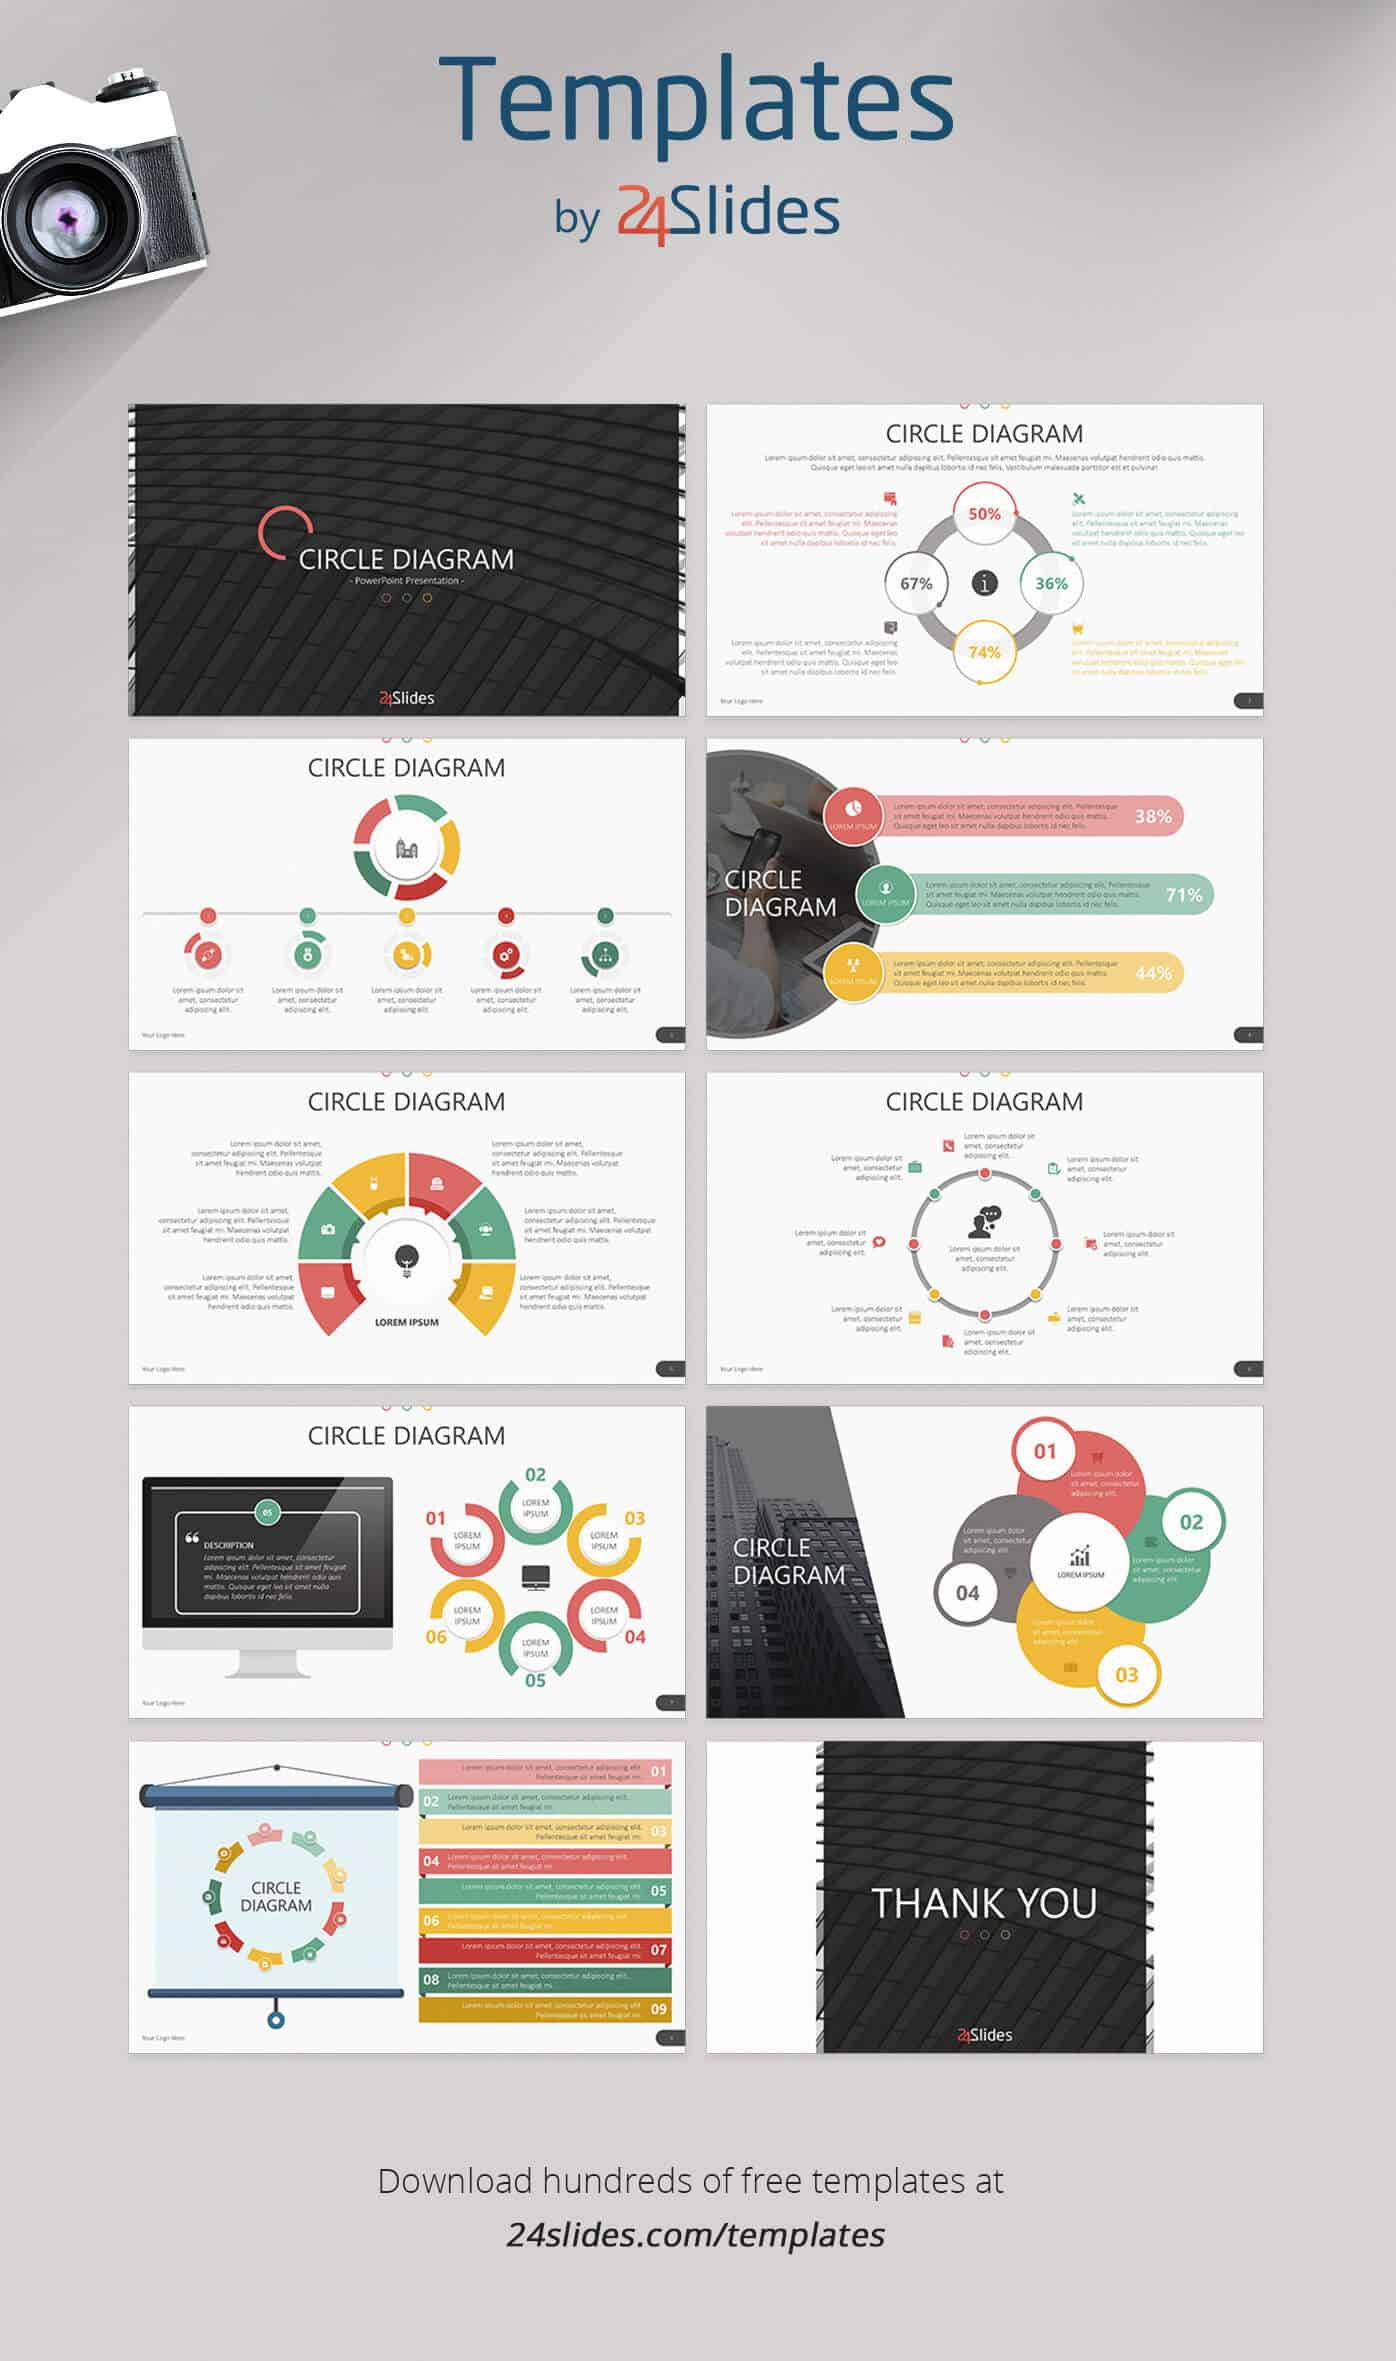 15 Fun And Colorful Free Powerpoint Templates | Present Better Inside Powerpoint Slides Design Templates For Free